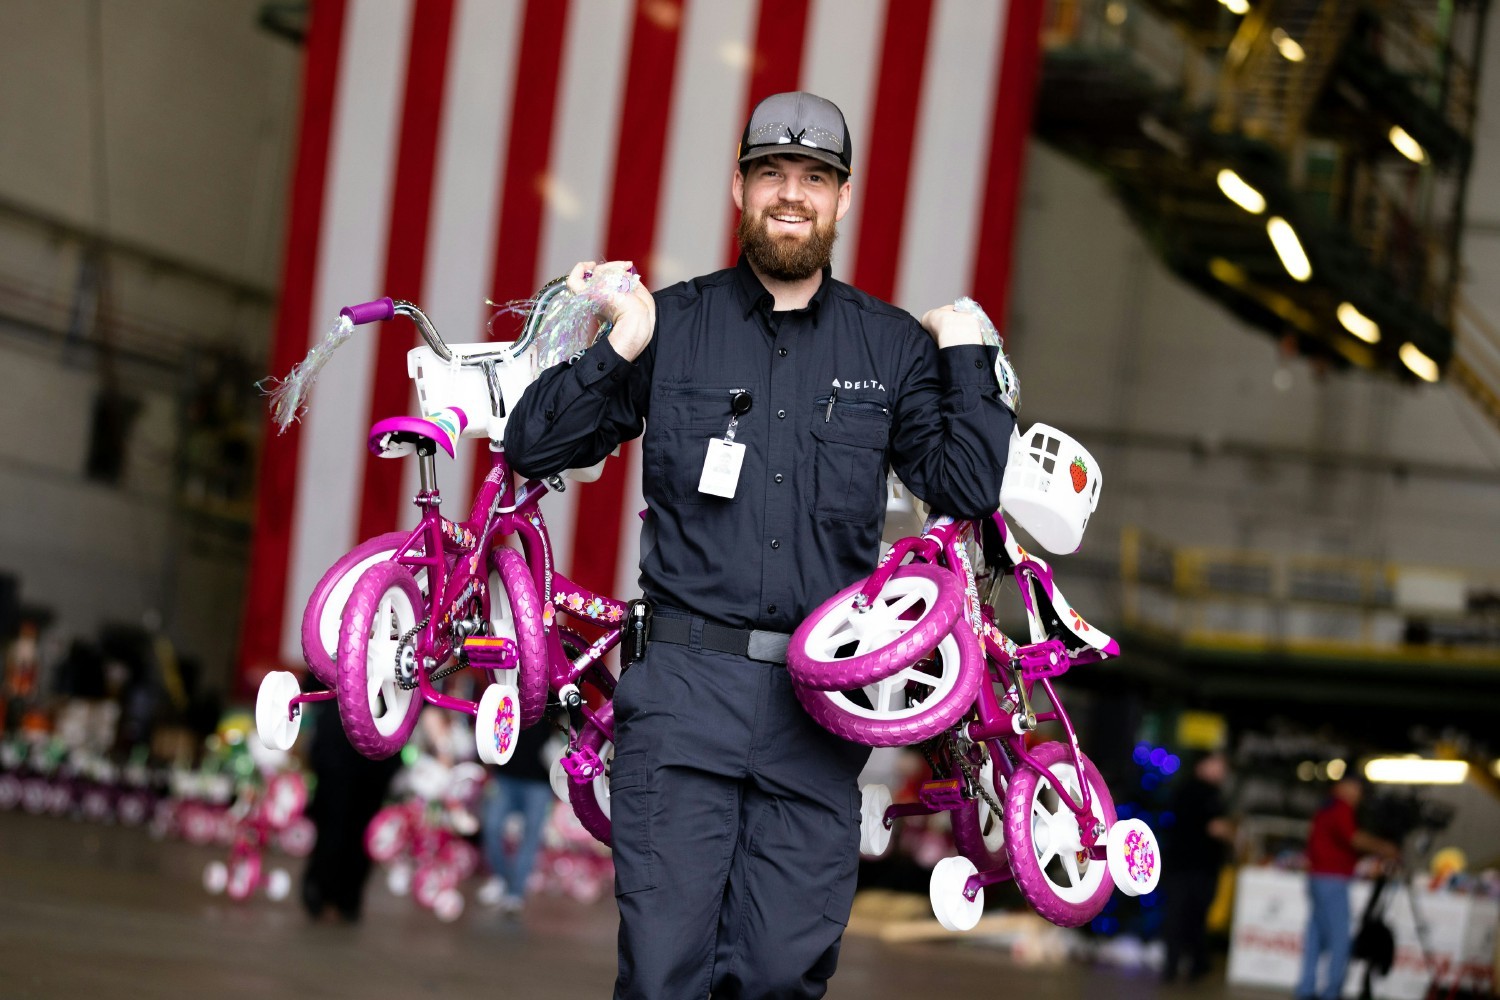 TechOps team assembled 1,476 bikes & helmets for the Marine Toys for Tots Foundation, breaking record for bike donations